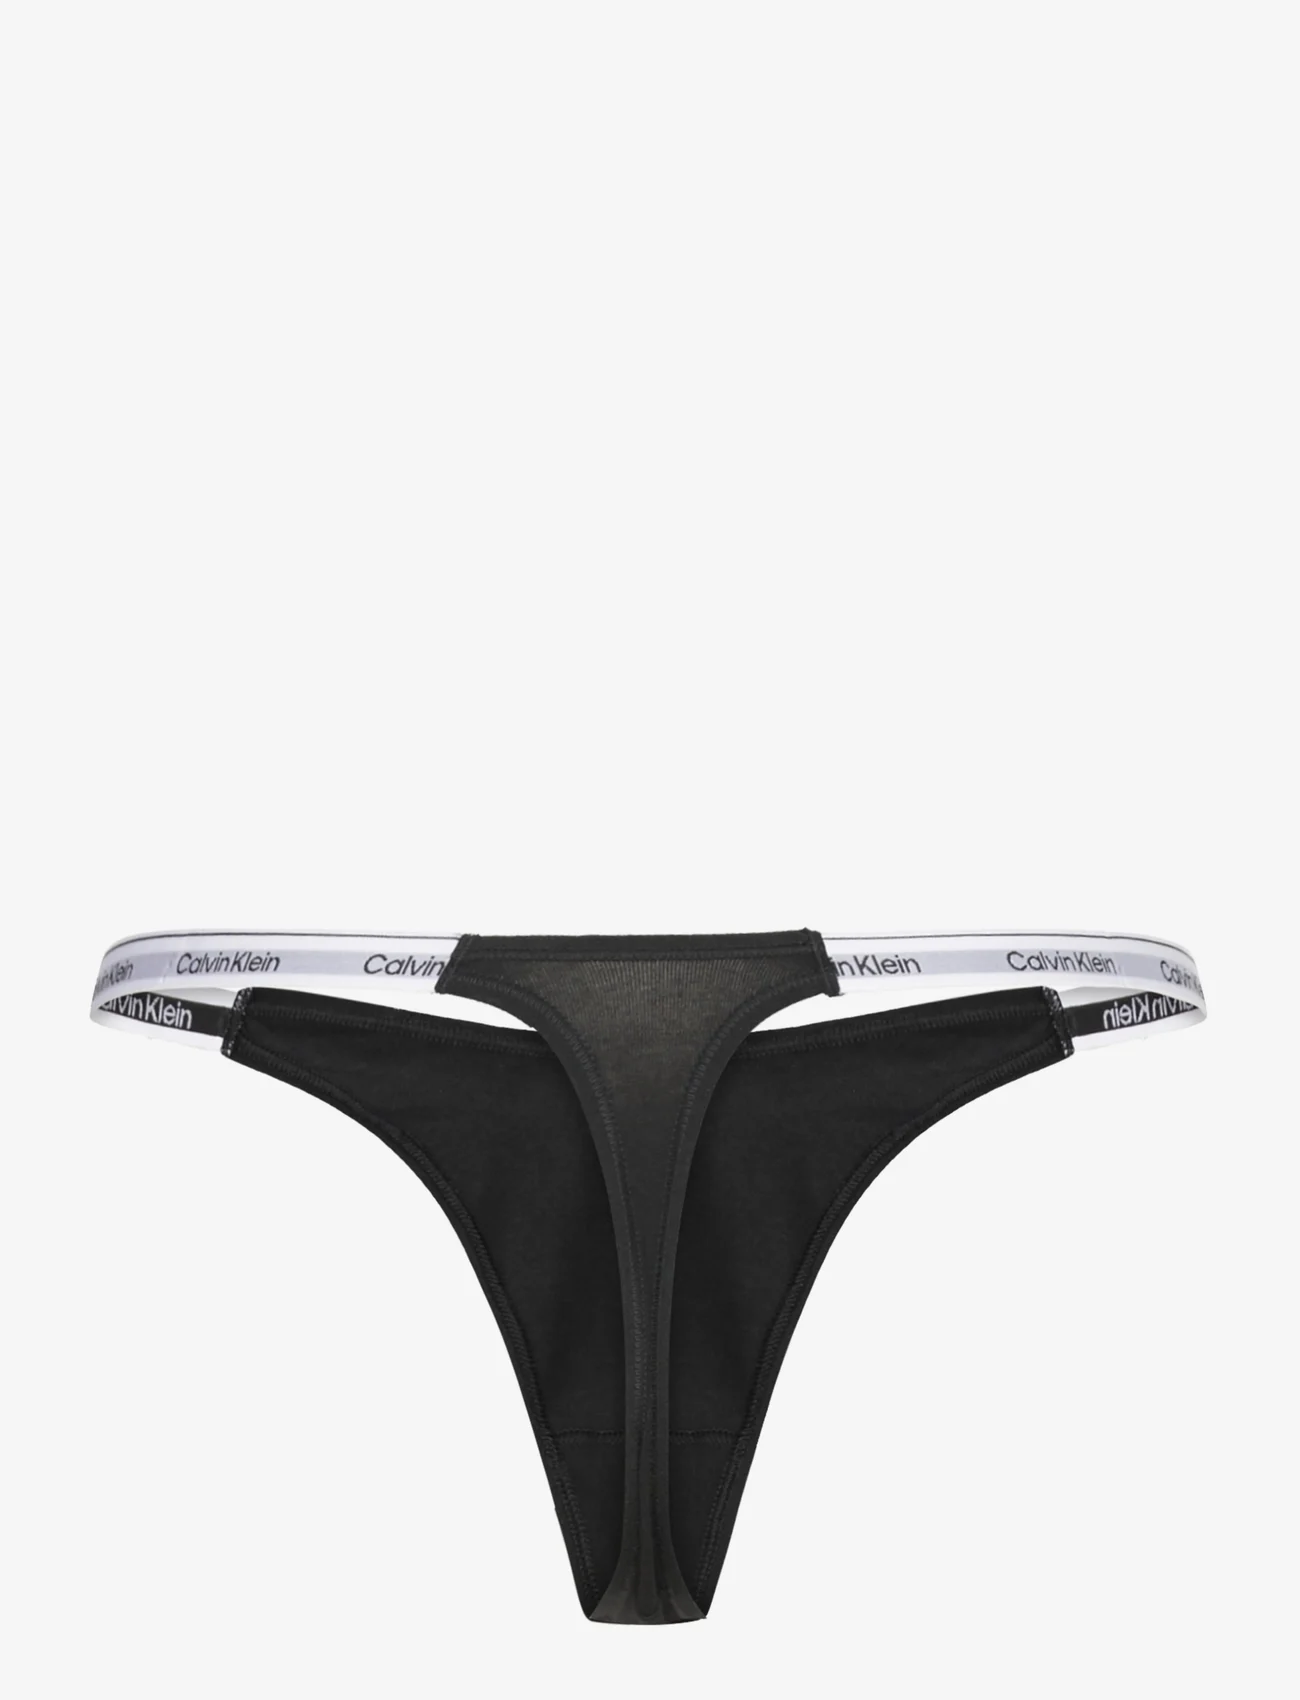 Calvin Klein - STRING THONG (DIPPED) - lowest prices - black - 1